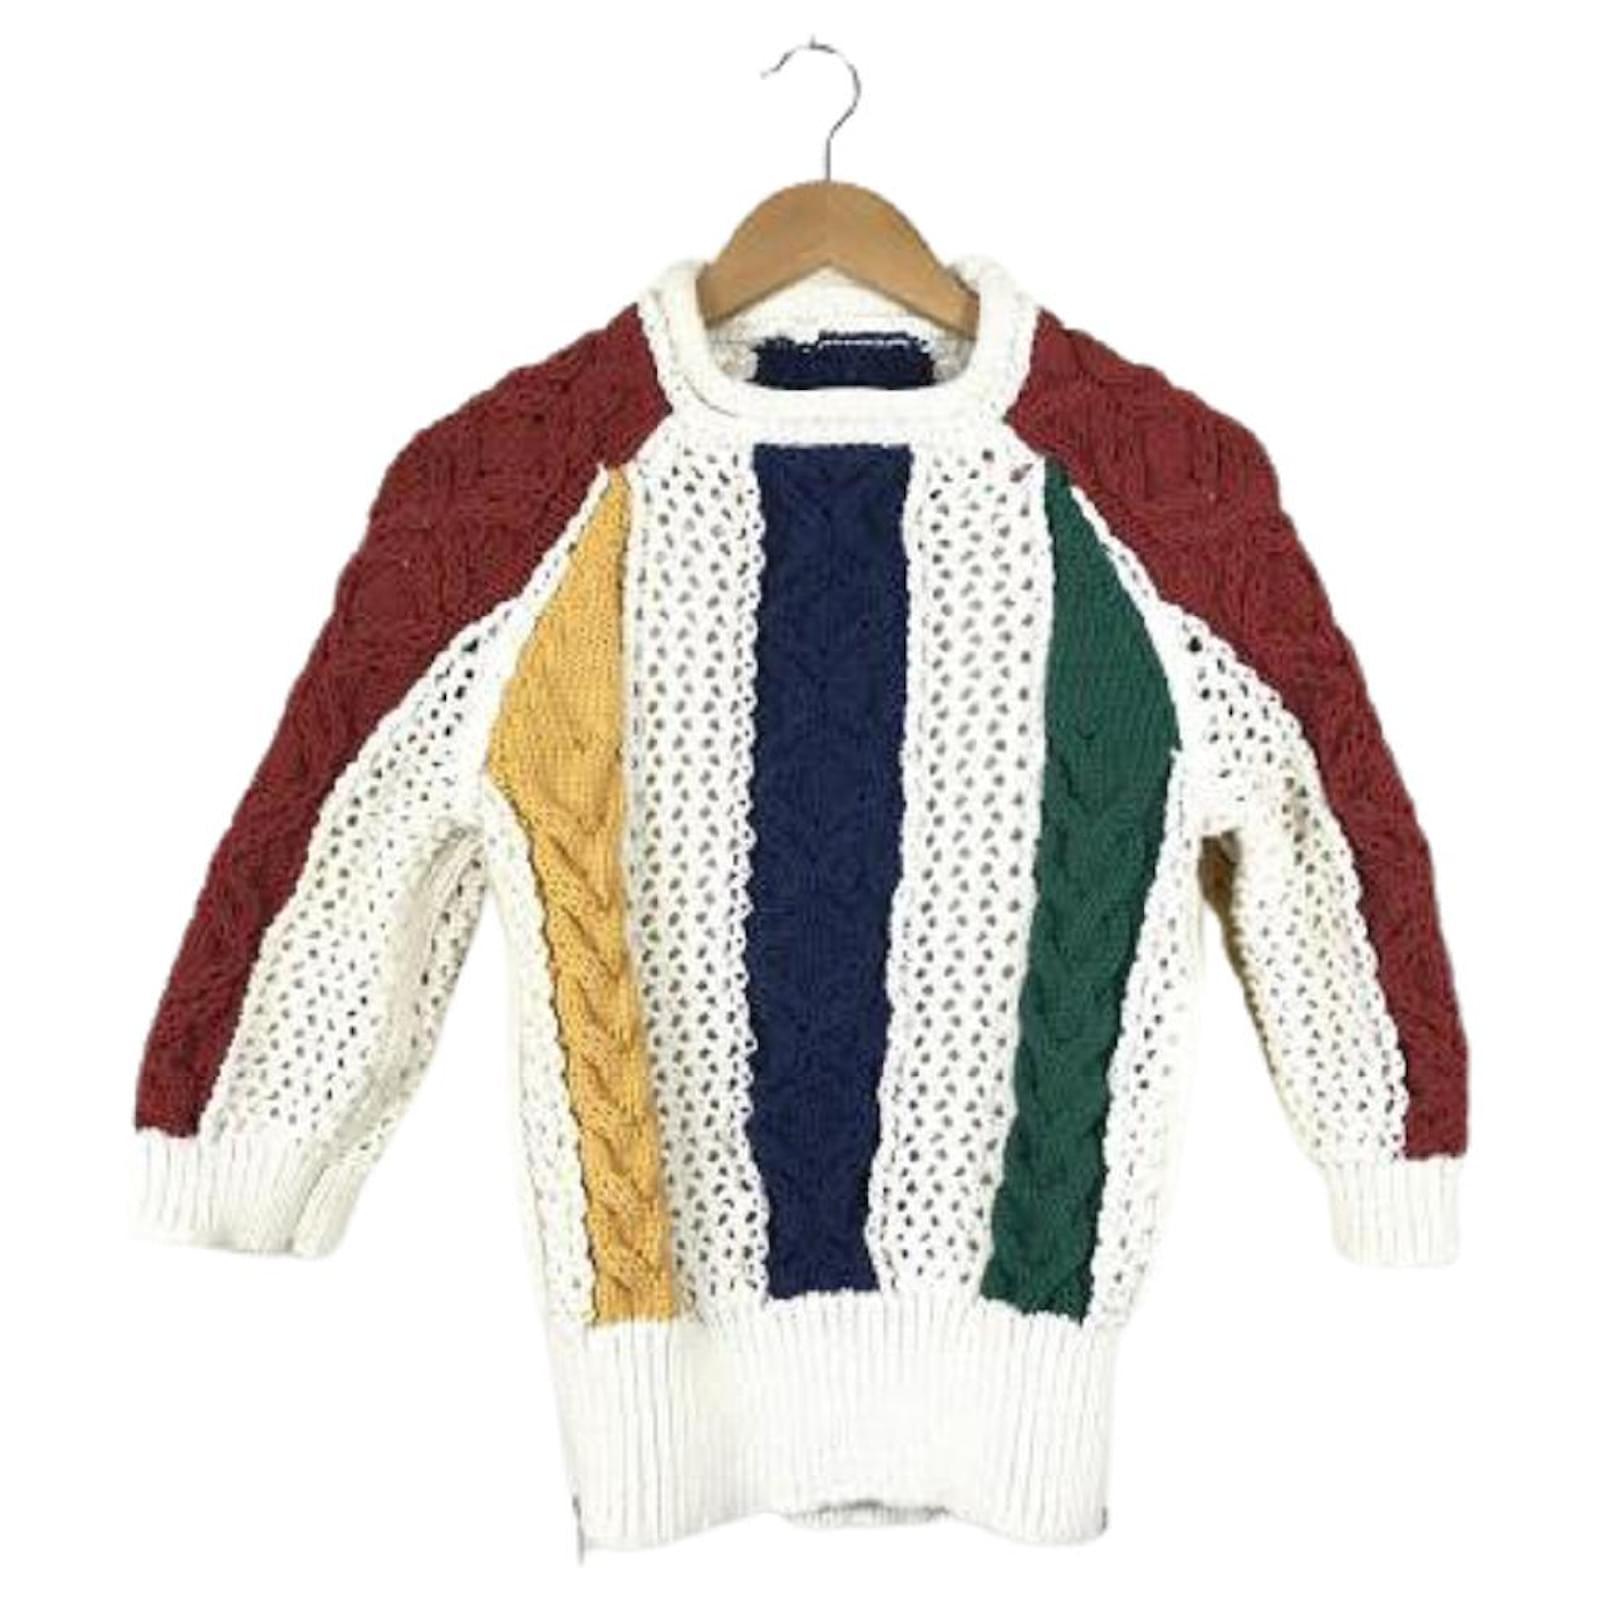 Used] Sacai Sweater (thick) / 1 / polyester / knit / deformed knit